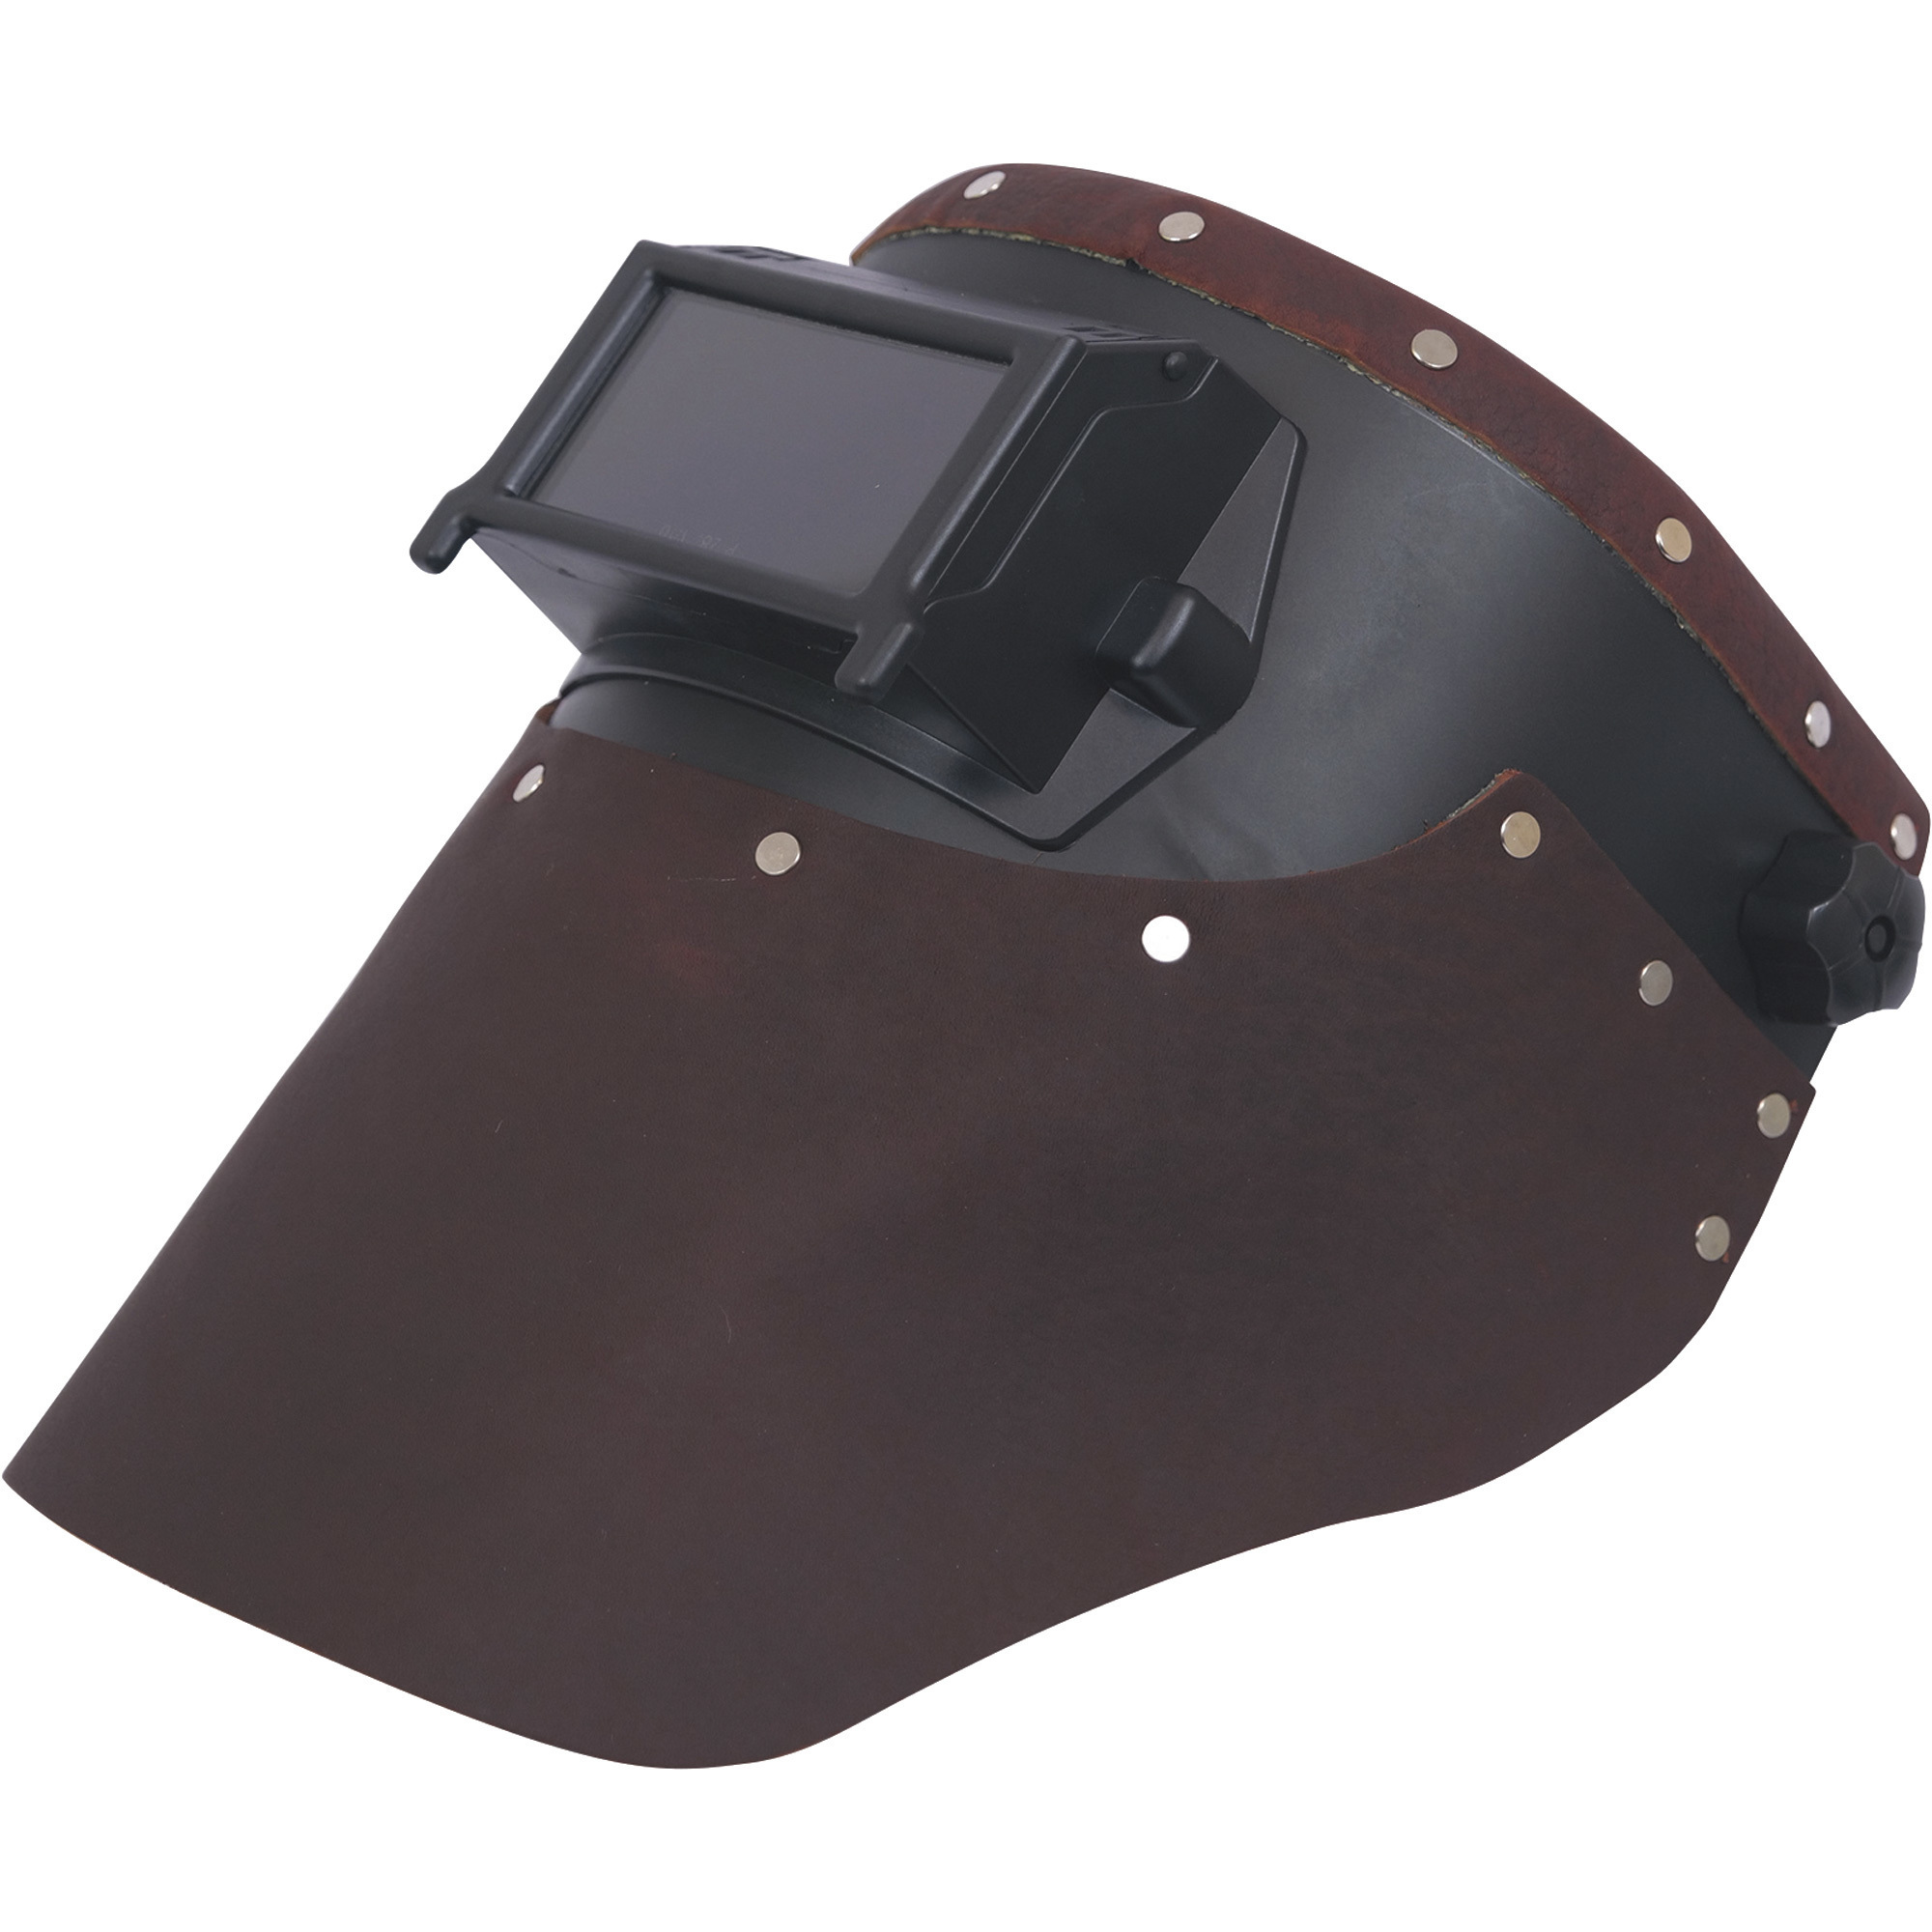 Outlaw Leather Welding Hood with Shade 10 â 2Inch x 4 1/4Inch Filter, Brown, Model OL-BRL-101